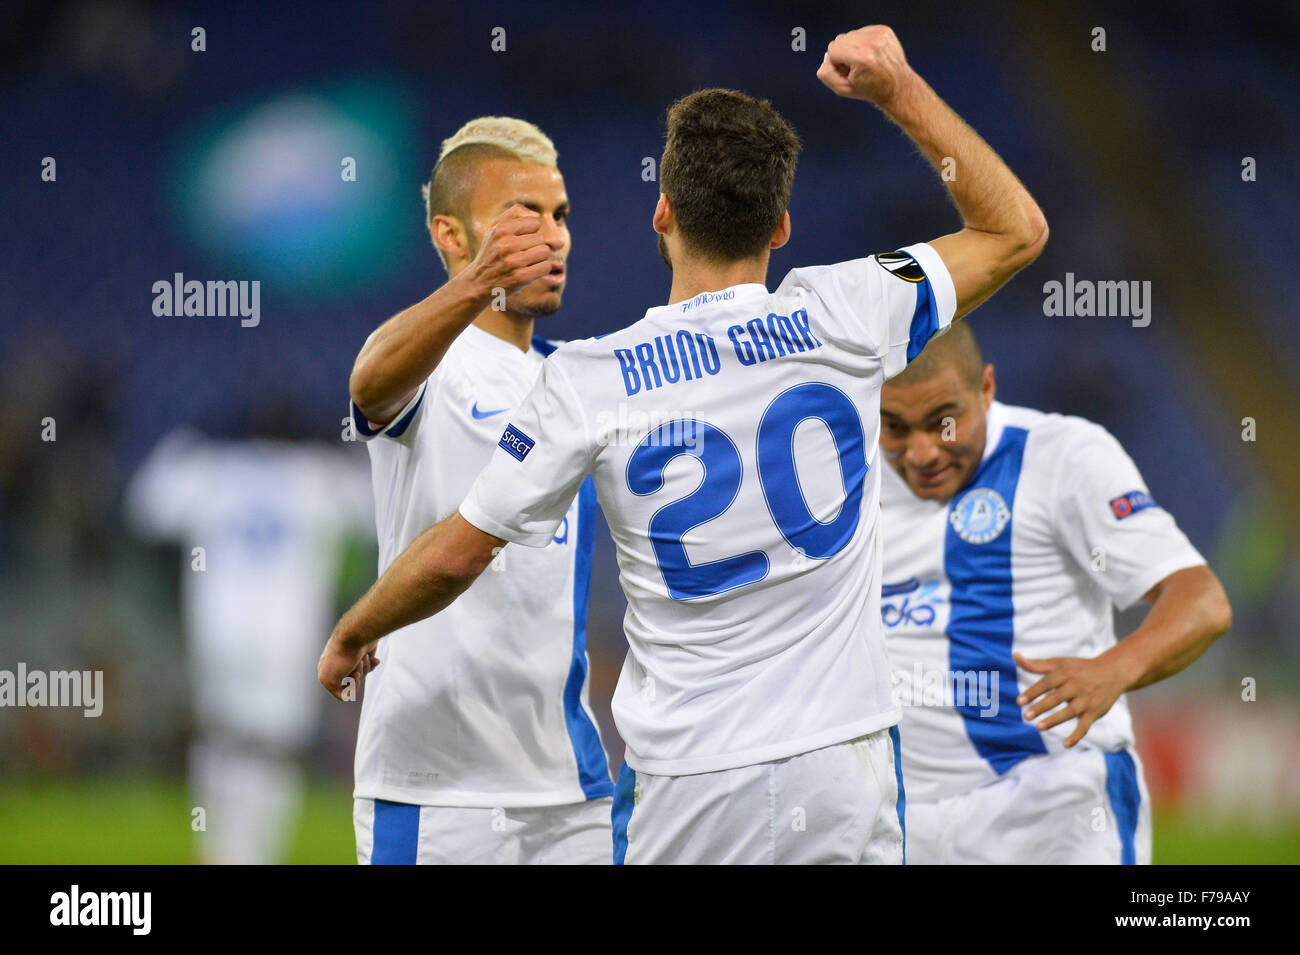 Rome, Italy. 26th November, 2015. Bruno Gama celebrates after scoring goal 1-1 during the Europe League football match S.S. Lazio vs F.C. Dnipro at the Olympic Stadium in Rome, on november 26, 2015 Credit:  Silvia Lore'/Alamy Live News Stock Photo